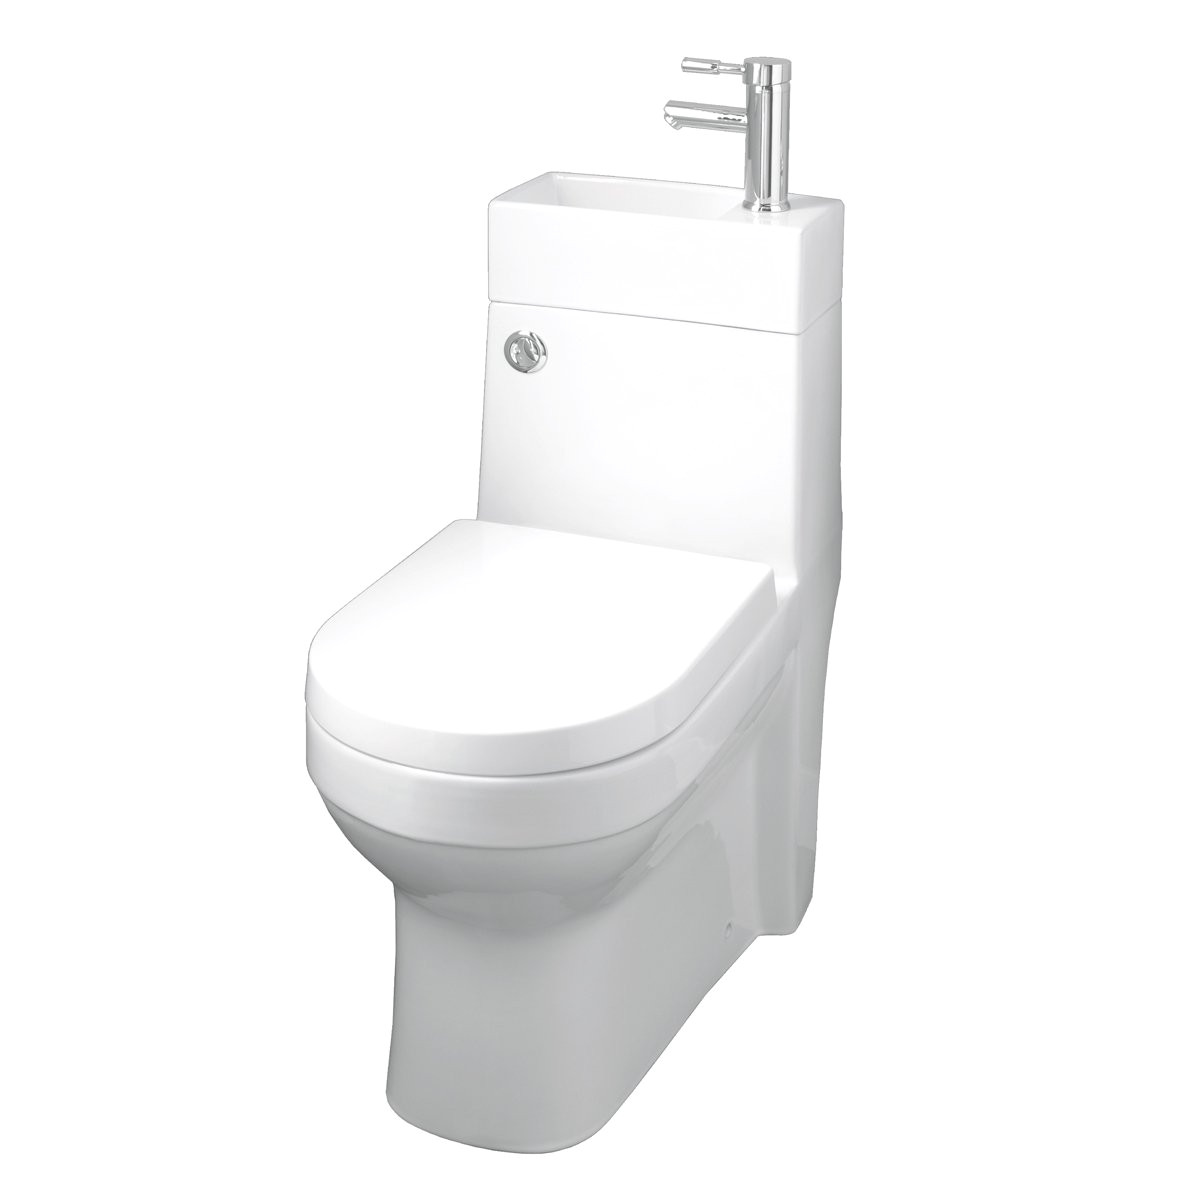 bathroom supastore two in one combination close coupled toilet with wash basin amazon co uk kitchen home